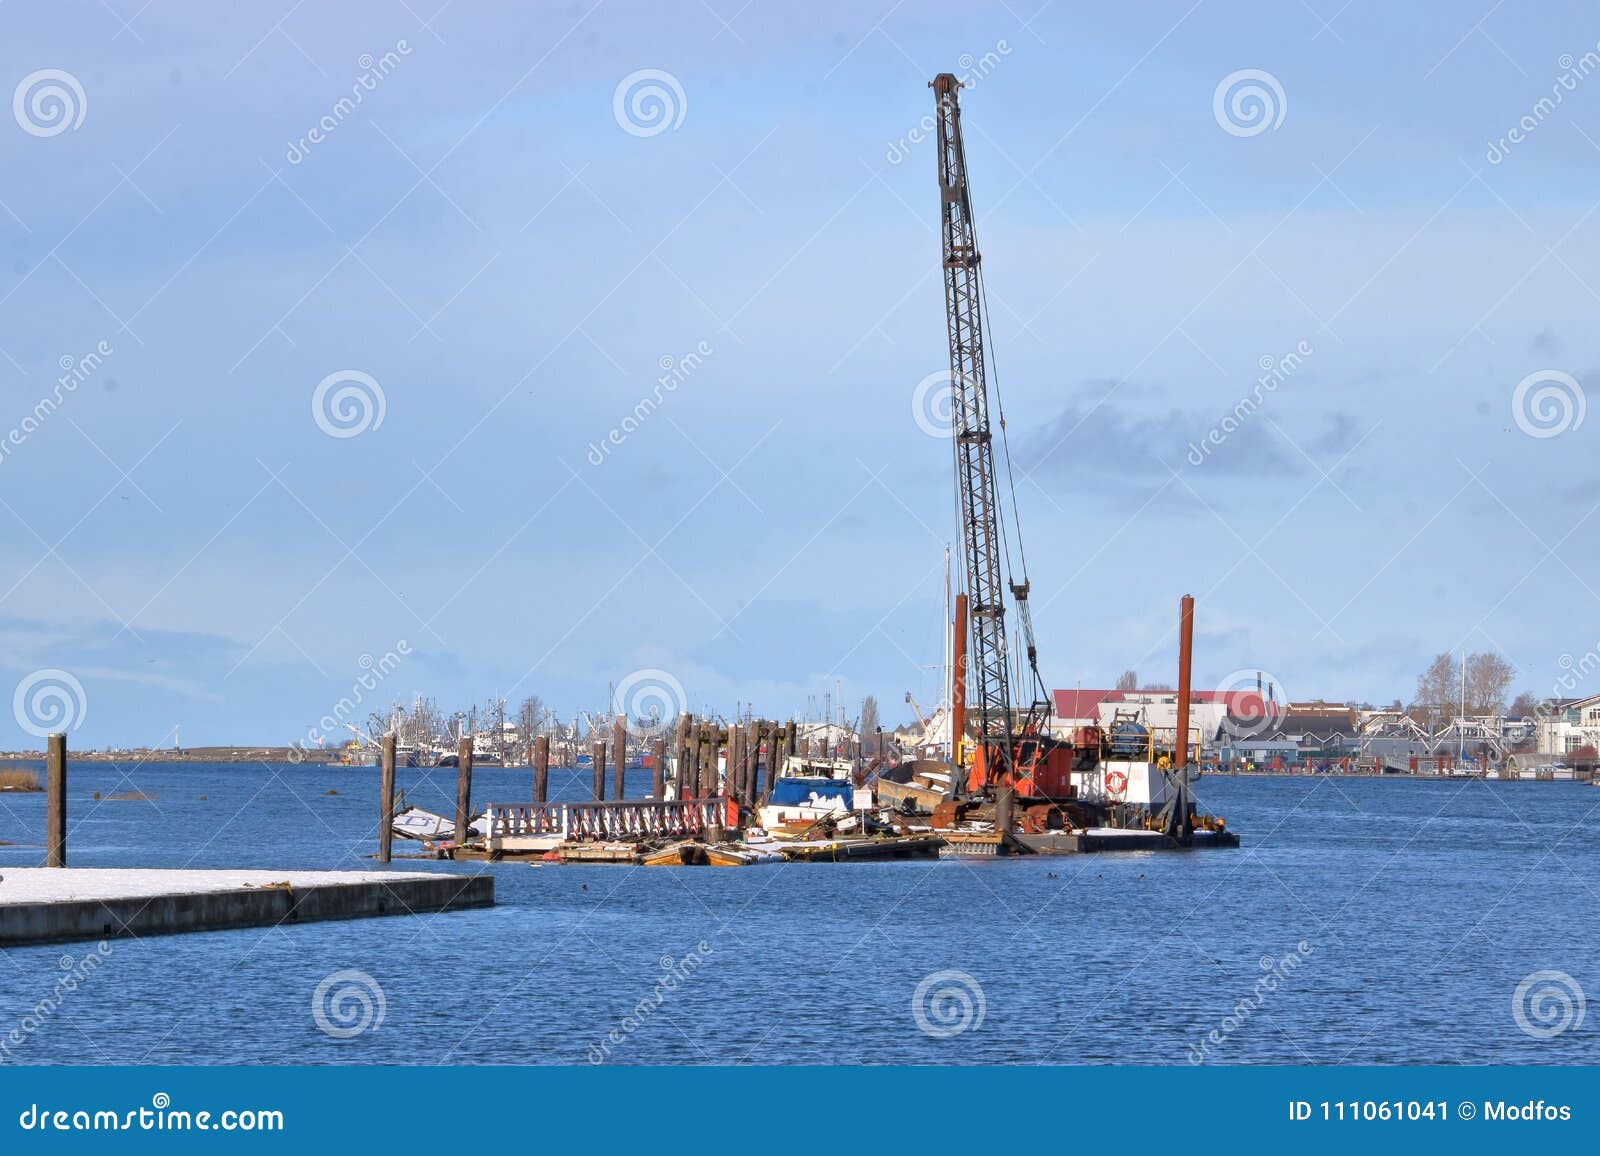 Industrial Floating Platform and Crane Stock Image - Image of fishing,  machinery: 111061041